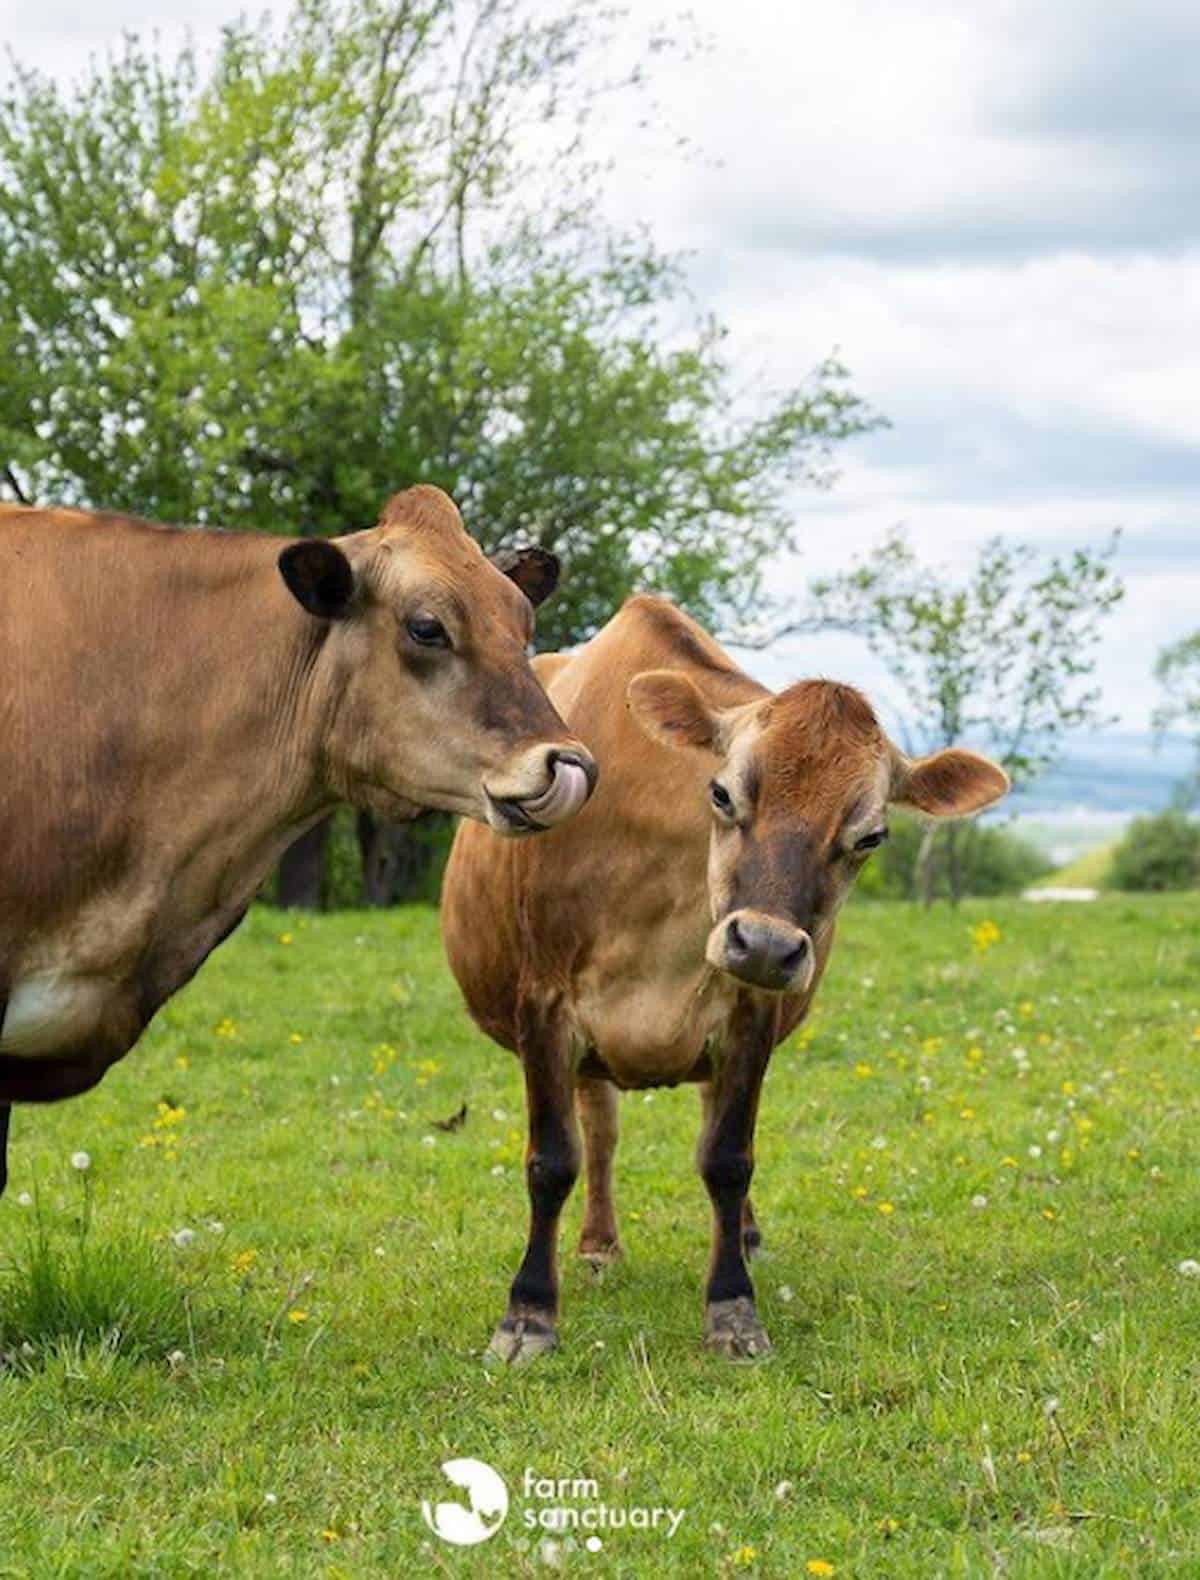 Mother cow and calf at the Farm Sanctuary.